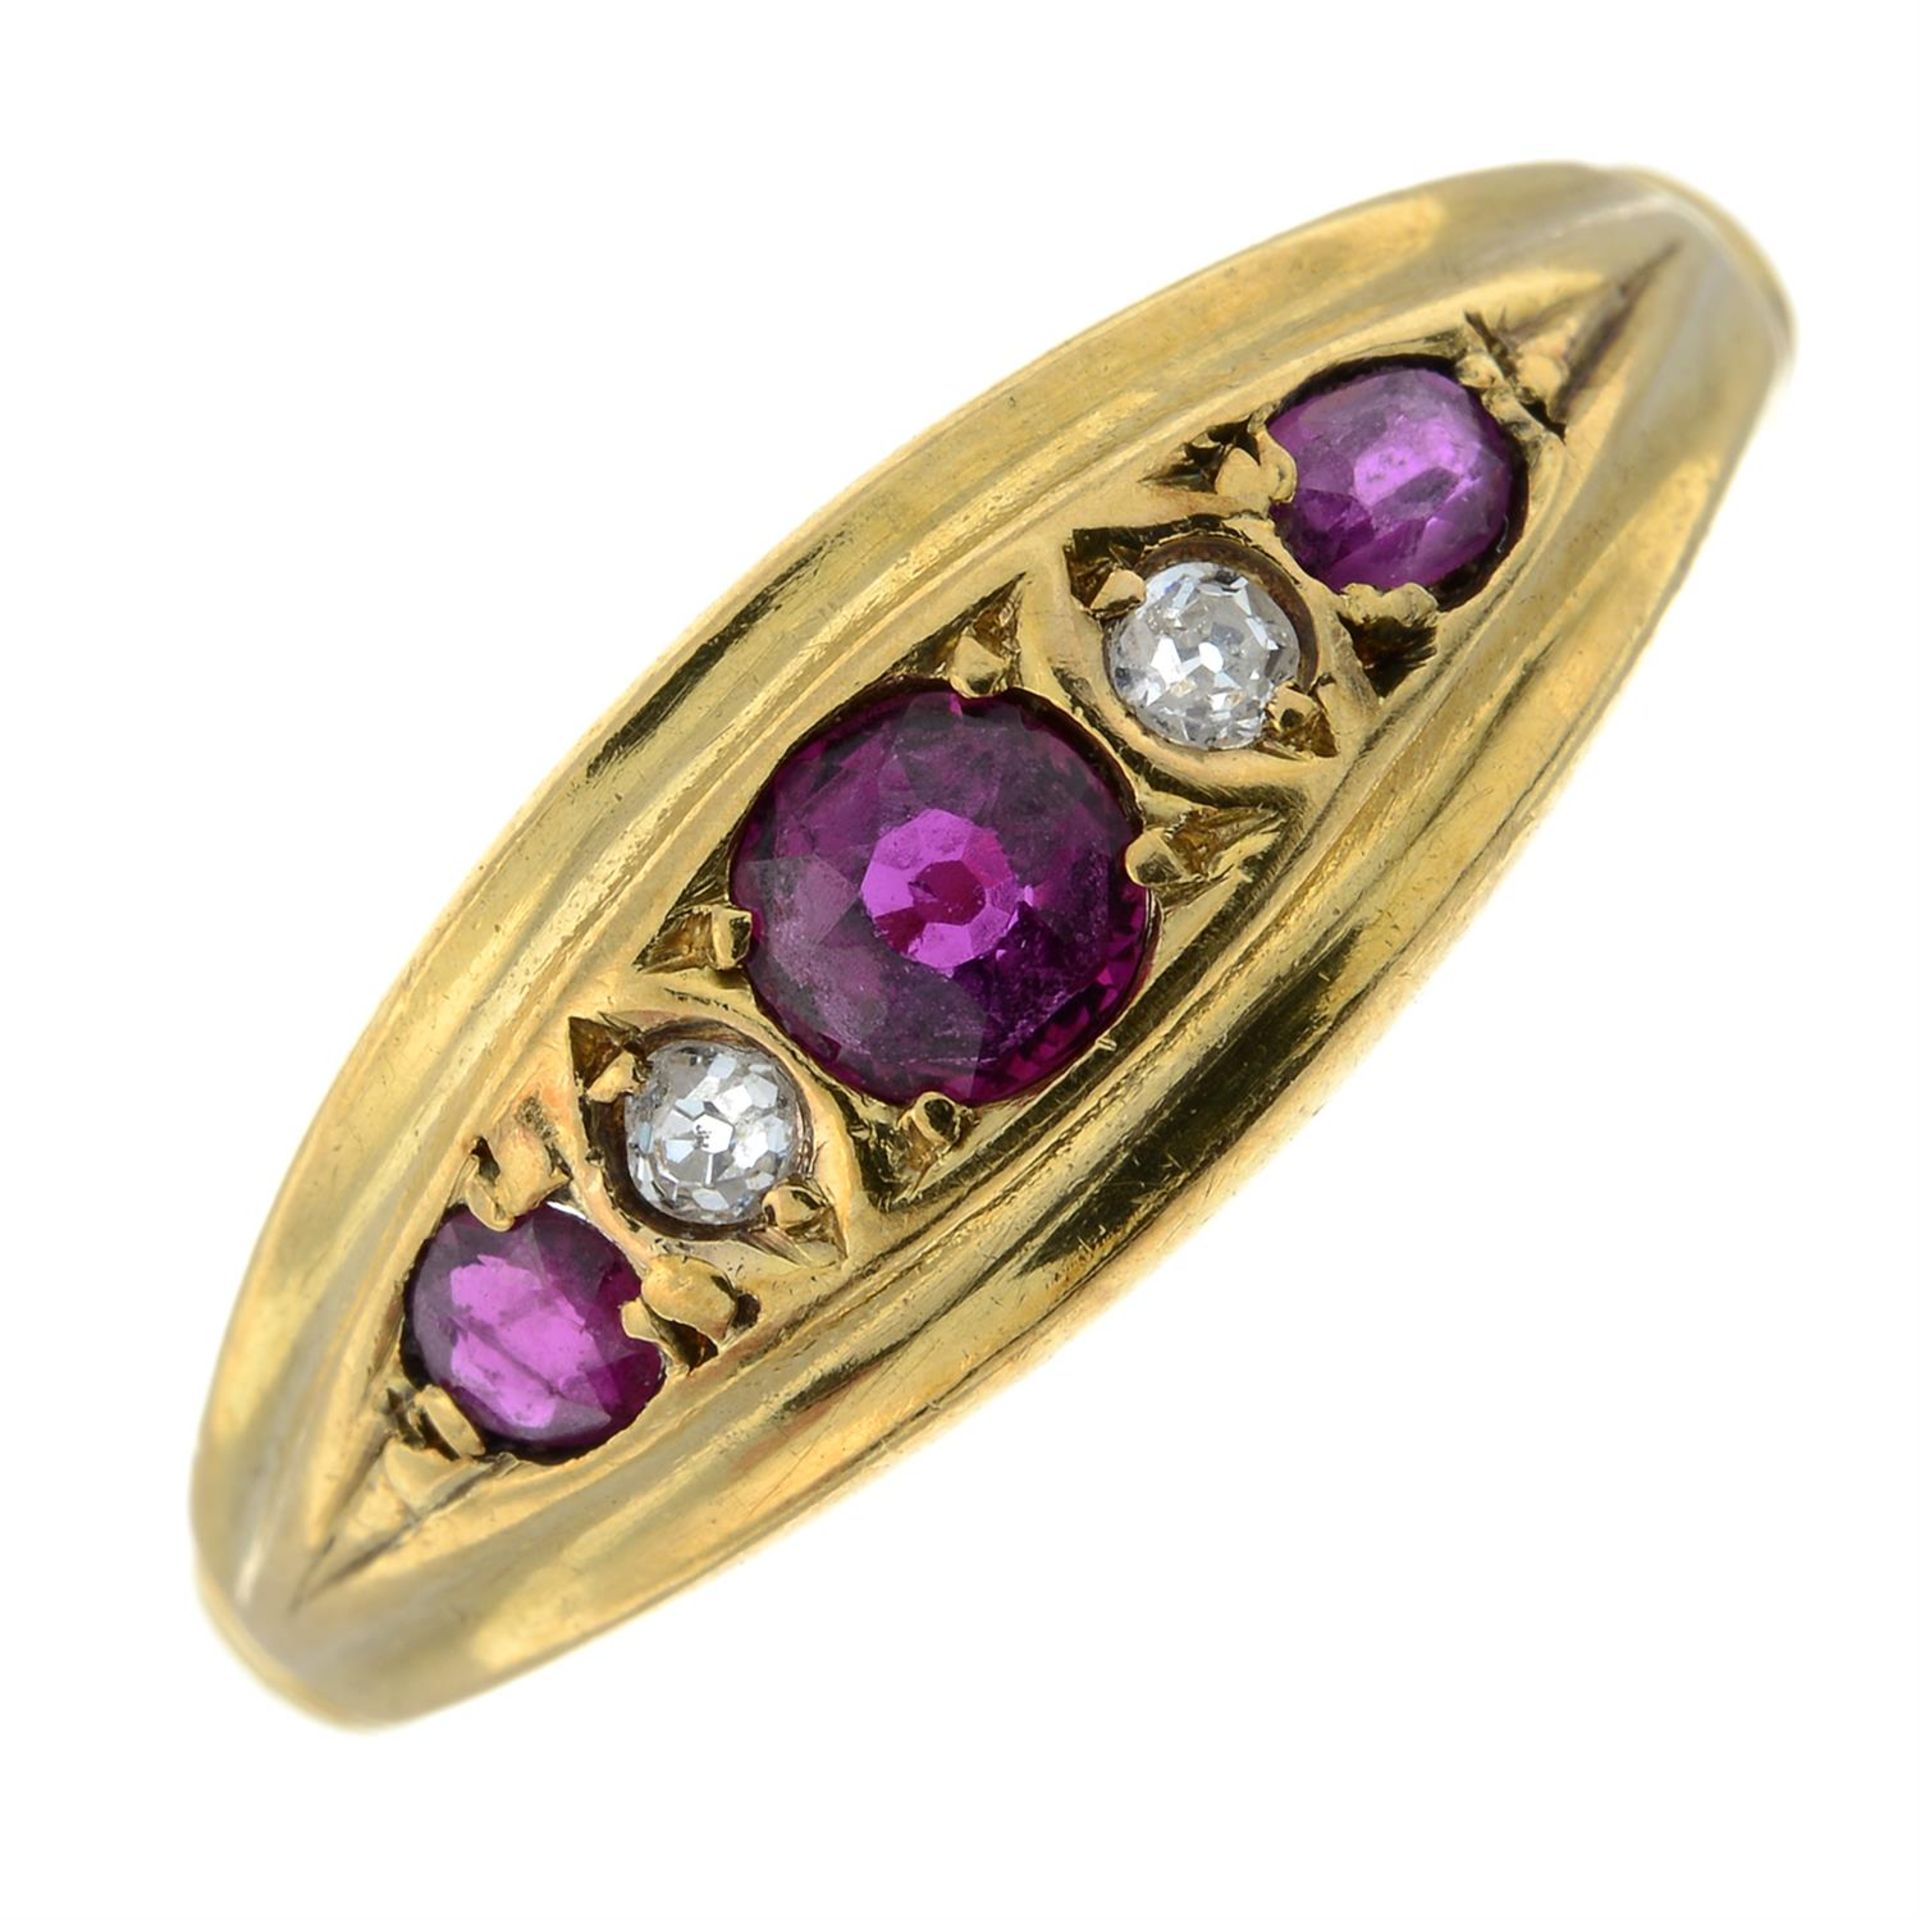 An early 20th century ruby and old-cut diamond five-stone ring.